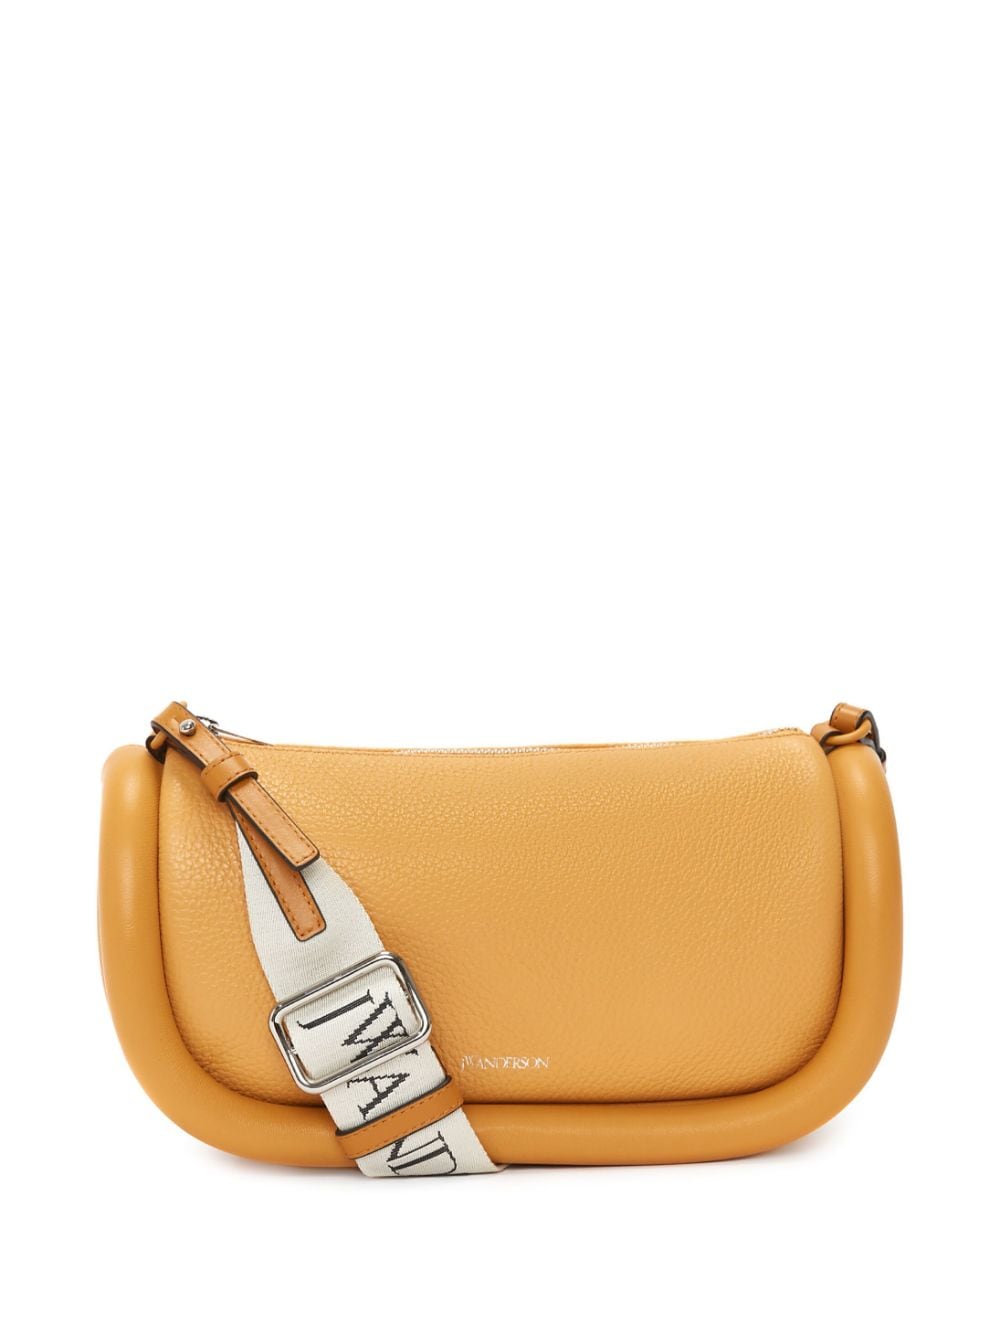 JW Anderson Bumper-15 leather shoulder bag - Yellow